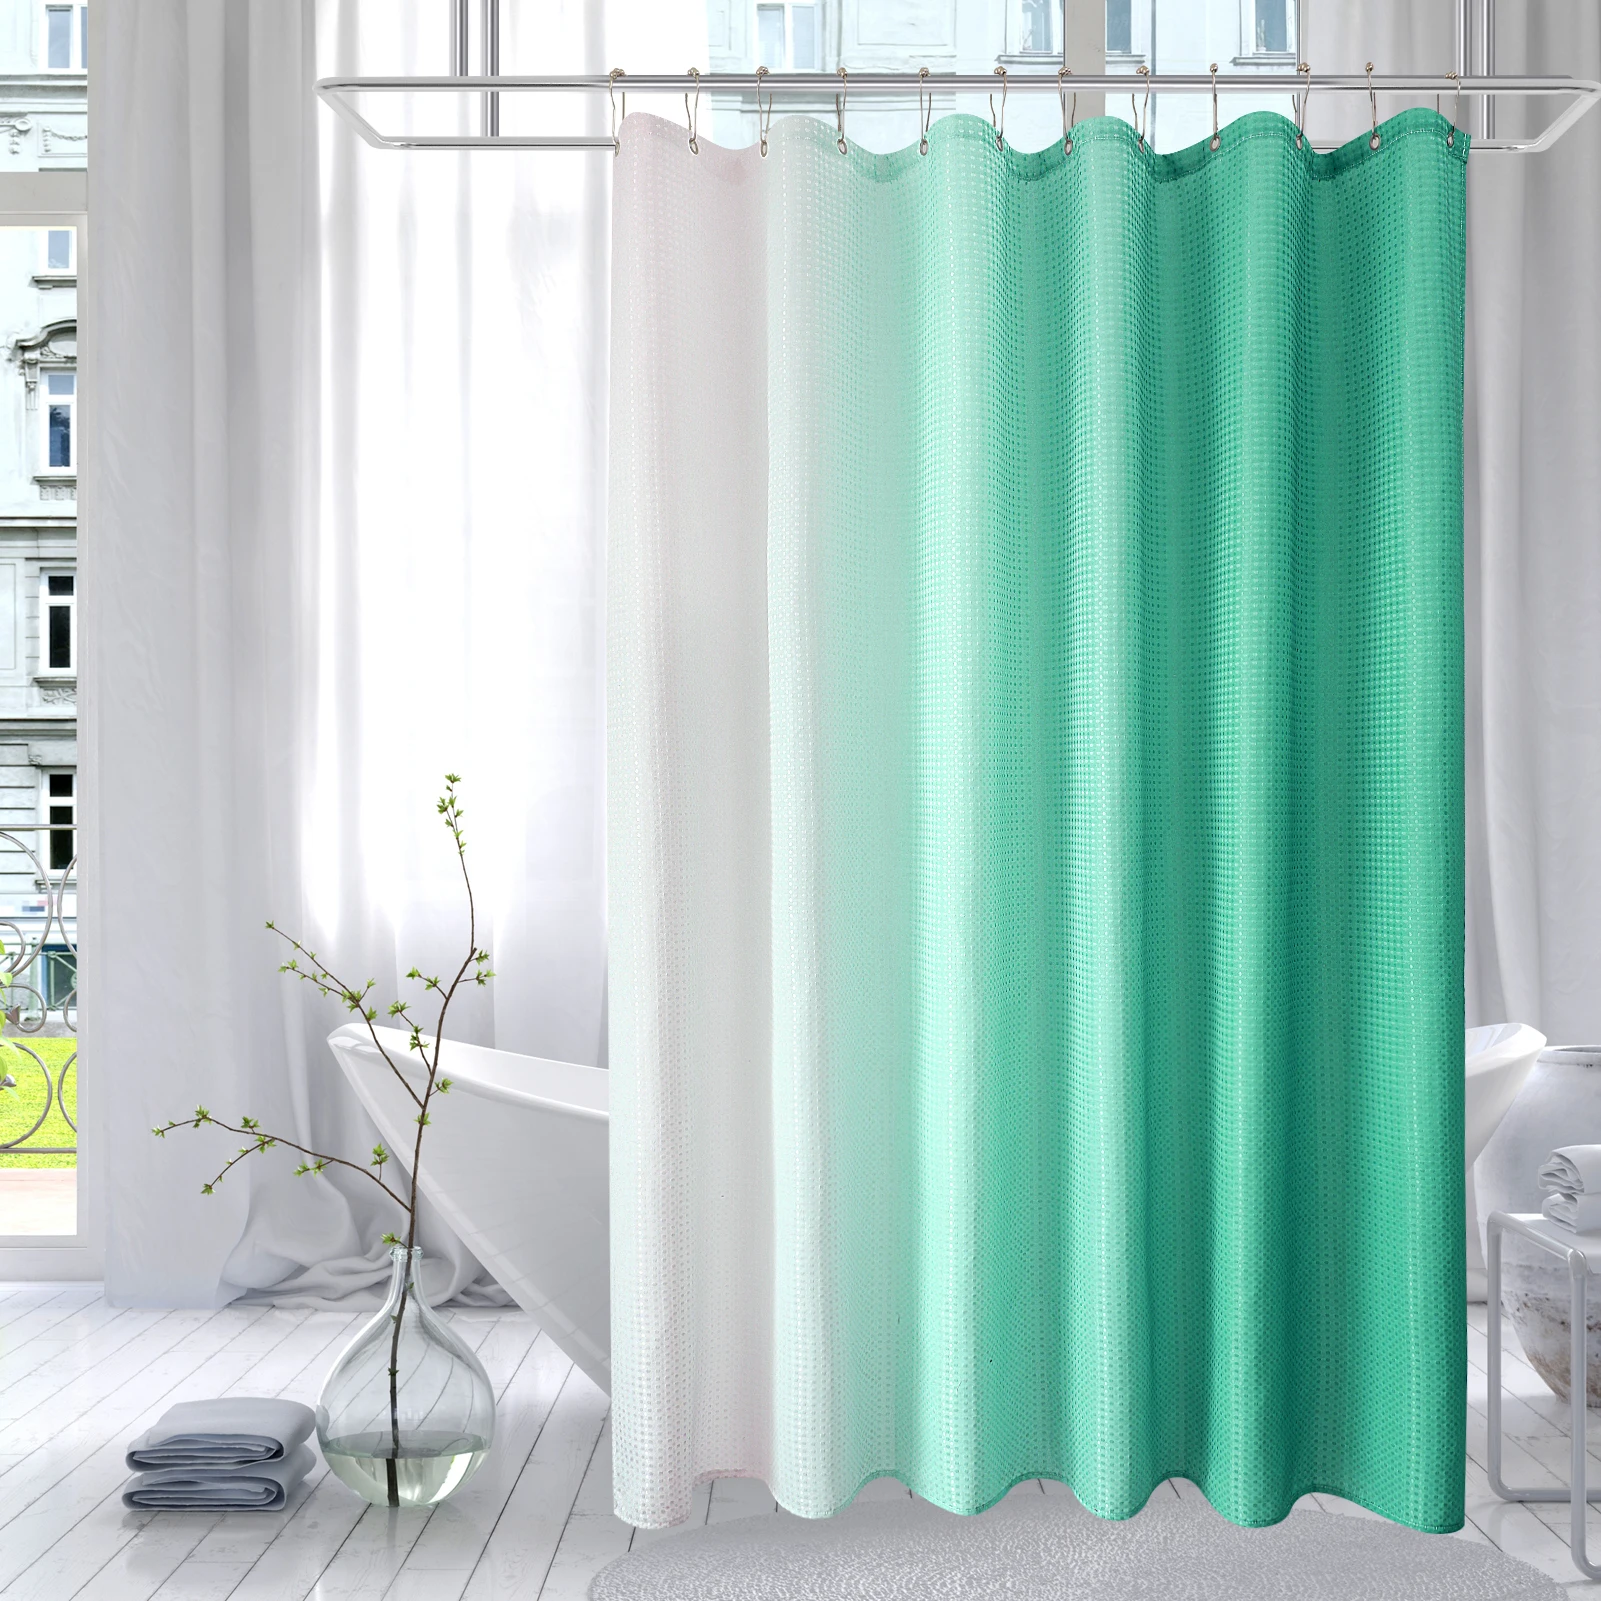 

Amazon Basics Fabric Aqua Shower Curtains with Grommets and Hooks, Long Bath Curtains Water Repellent for Bathroom Decor, As color card